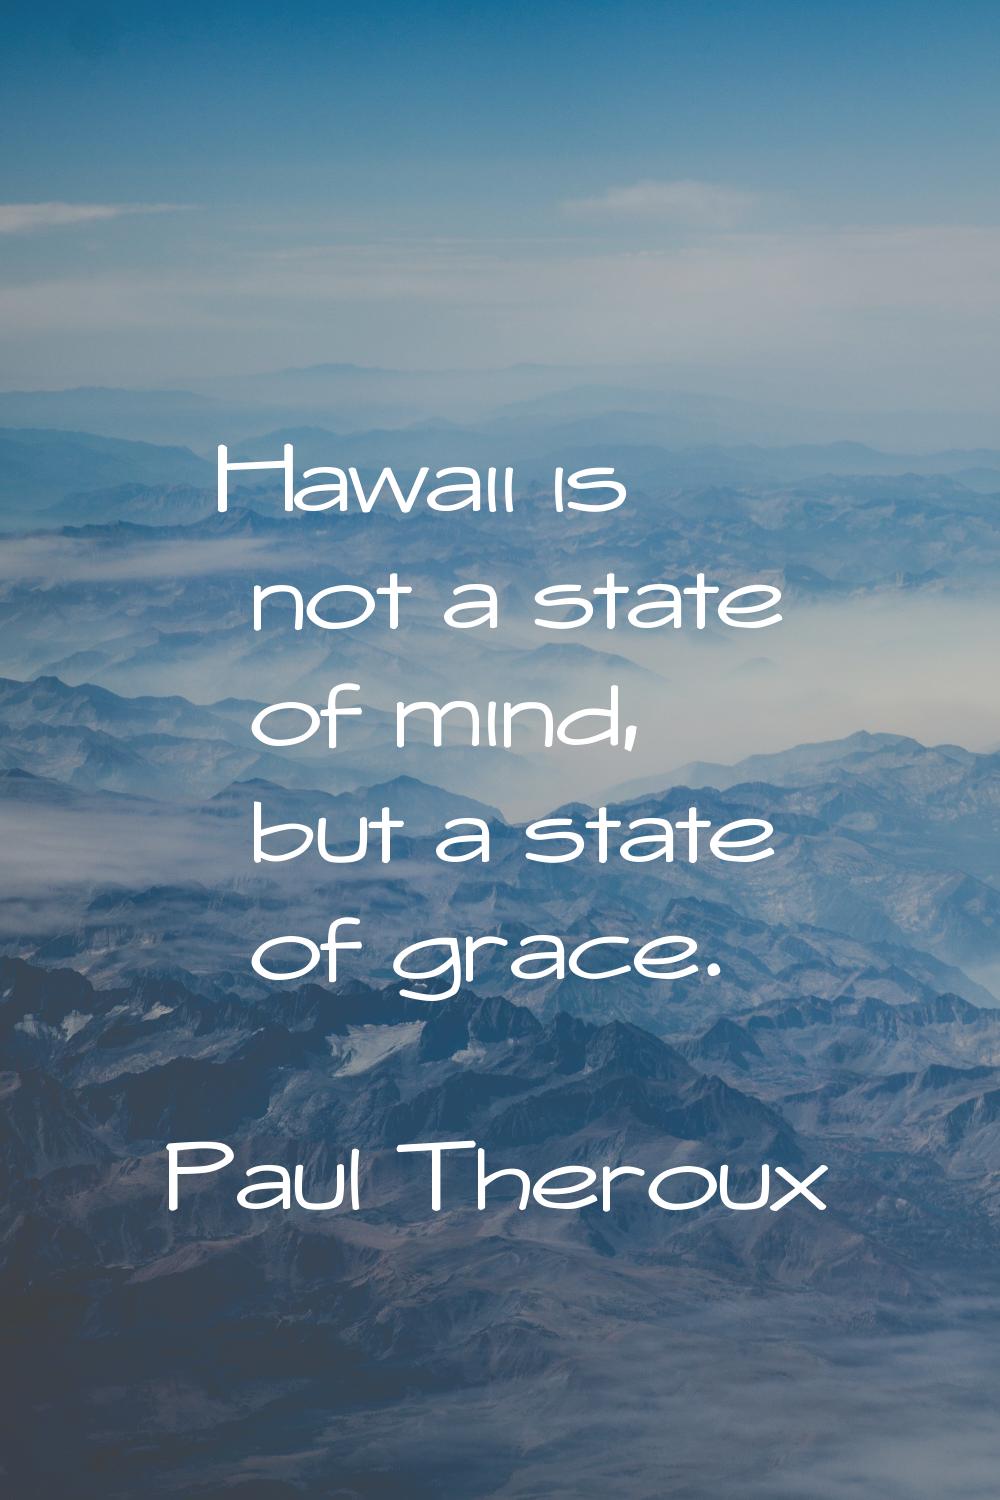 Hawaii is not a state of mind, but a state of grace.